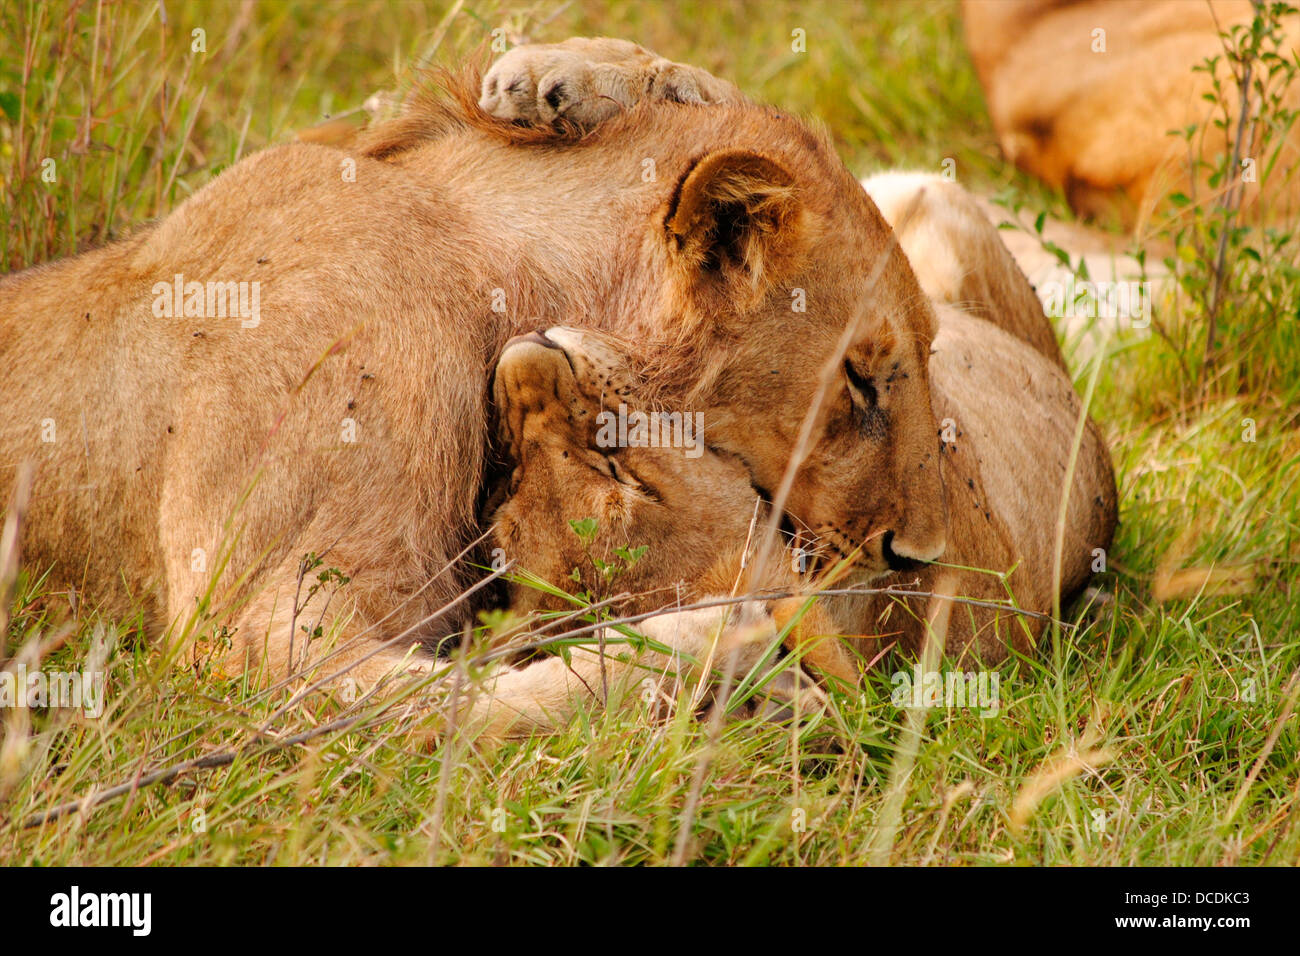 Two lions play fighting/wrestling in the grass. Stock Photo